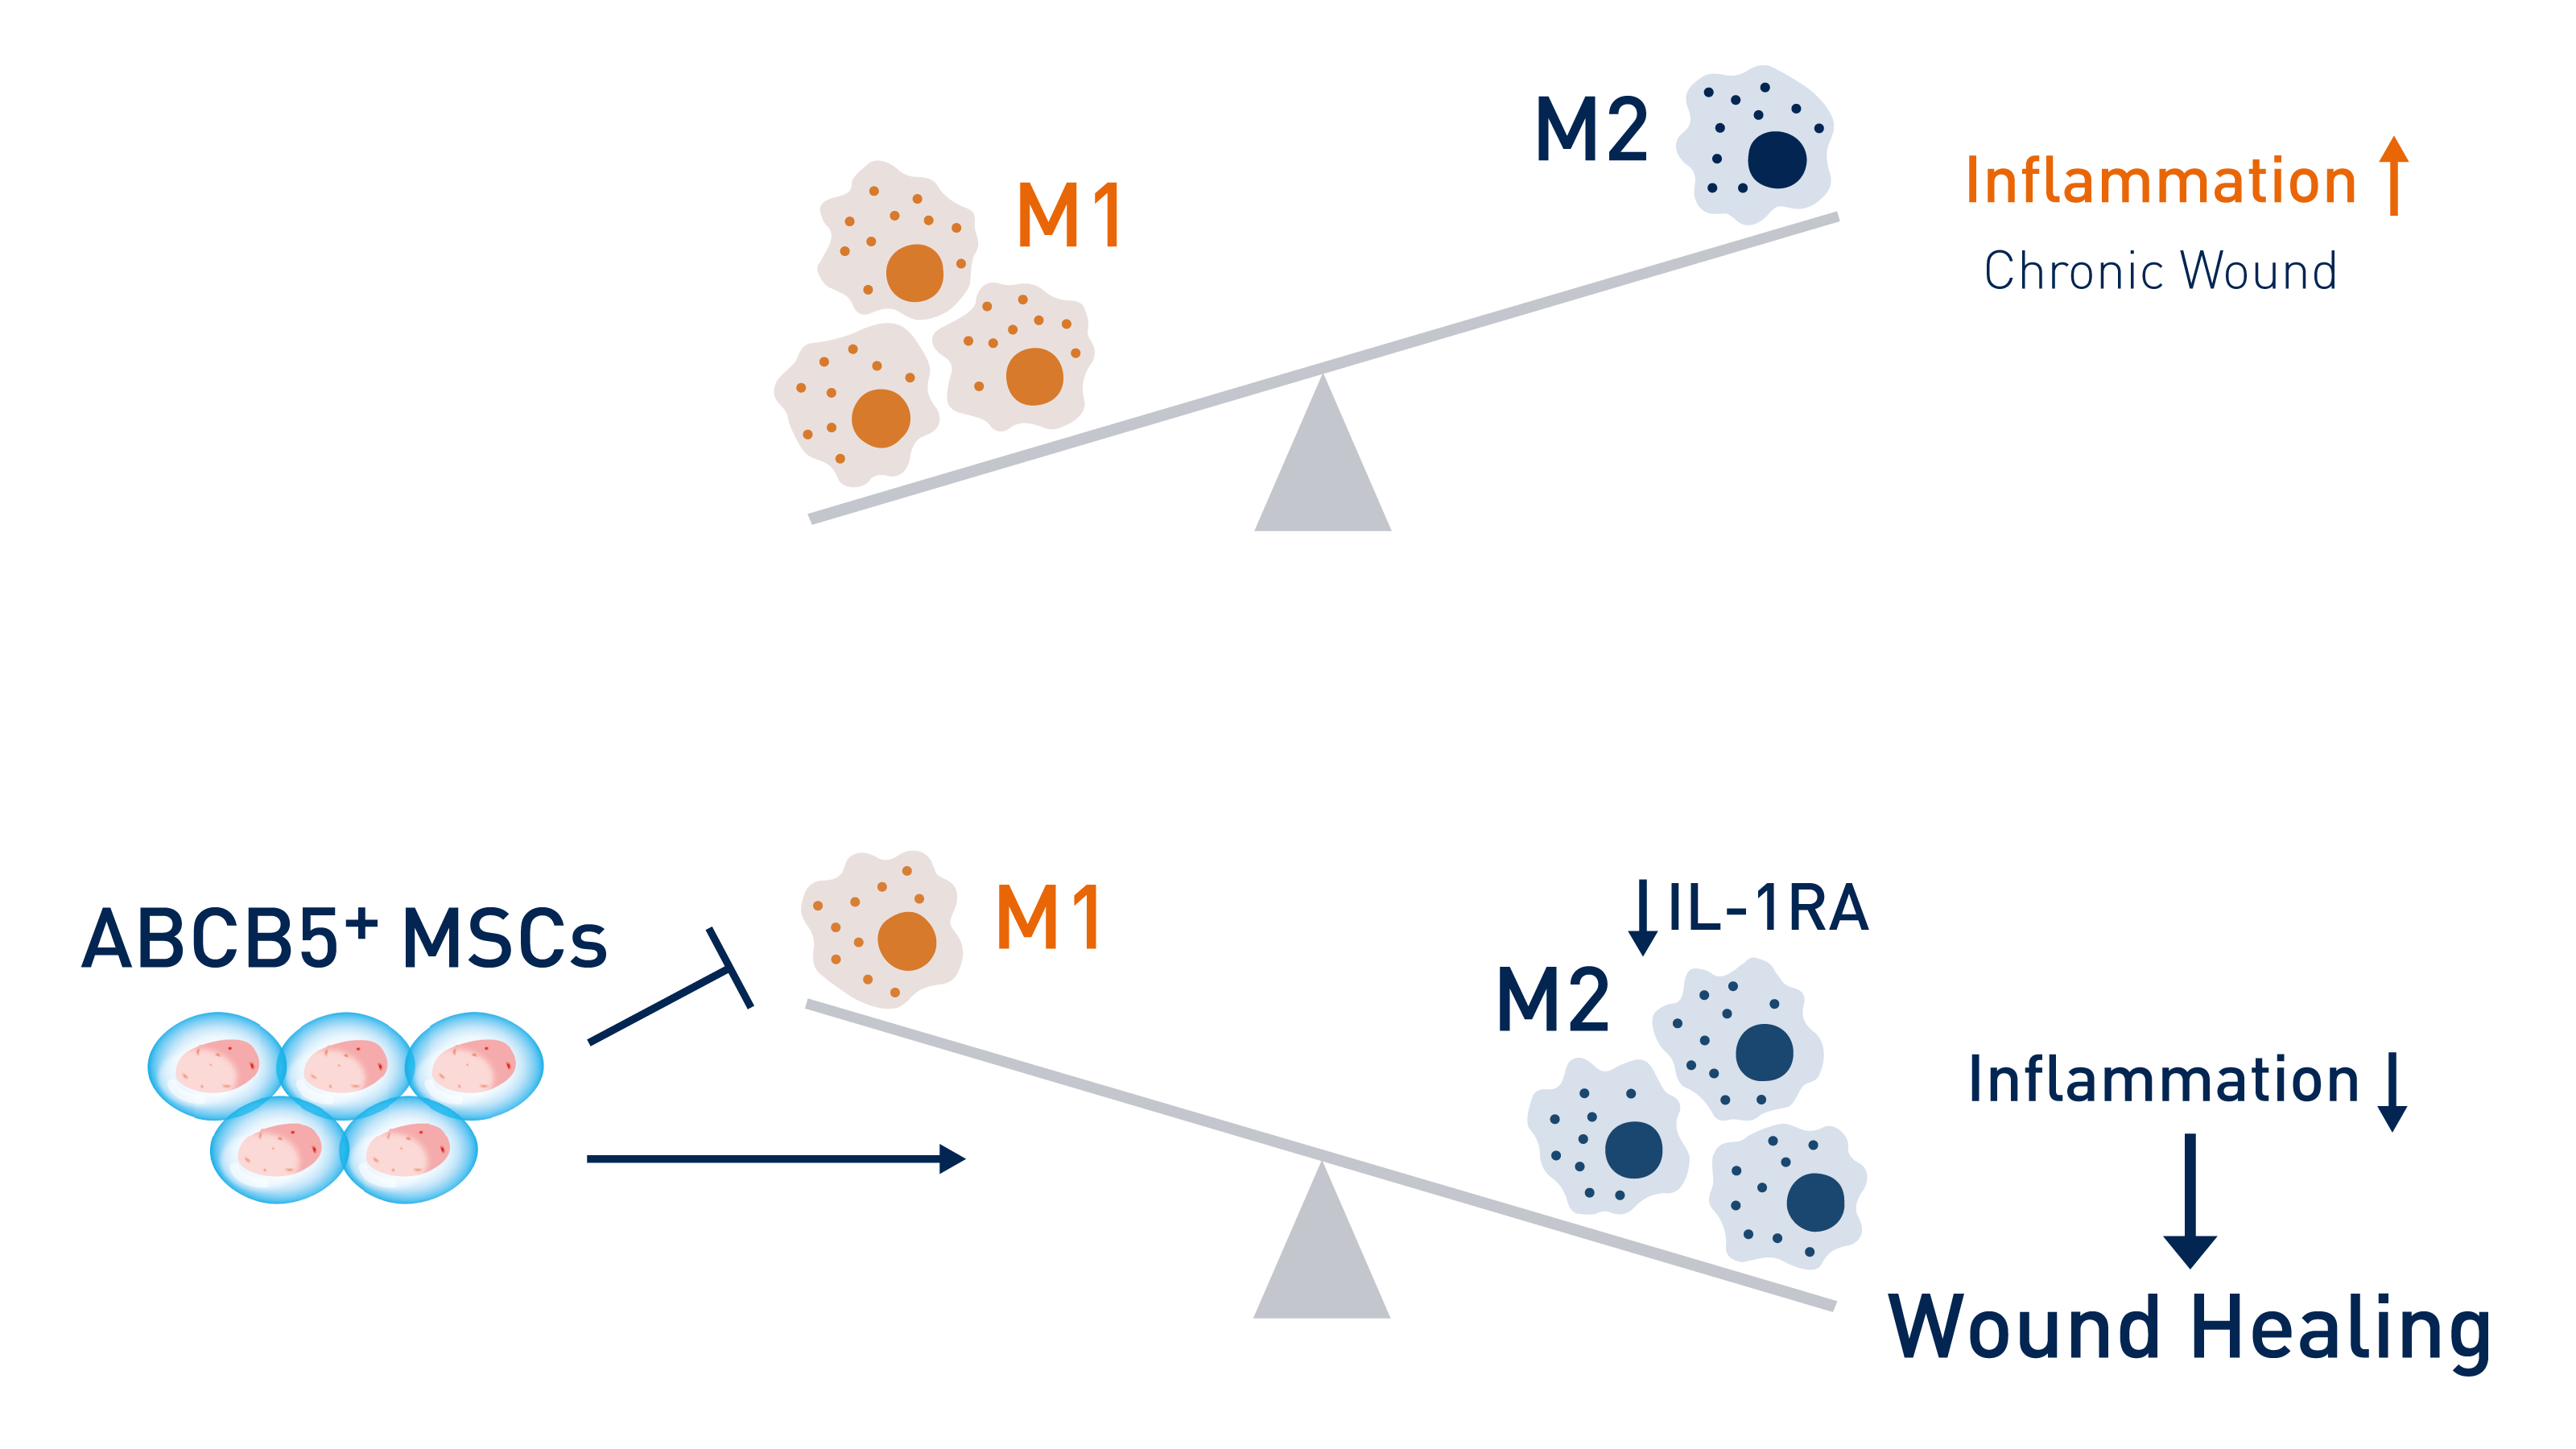 Drawing of the ratio of M1 and M2 macrophages with the help of a scale. In the stage of inflammation M1 macrophages predominate, in wound healing M2 macrophages.